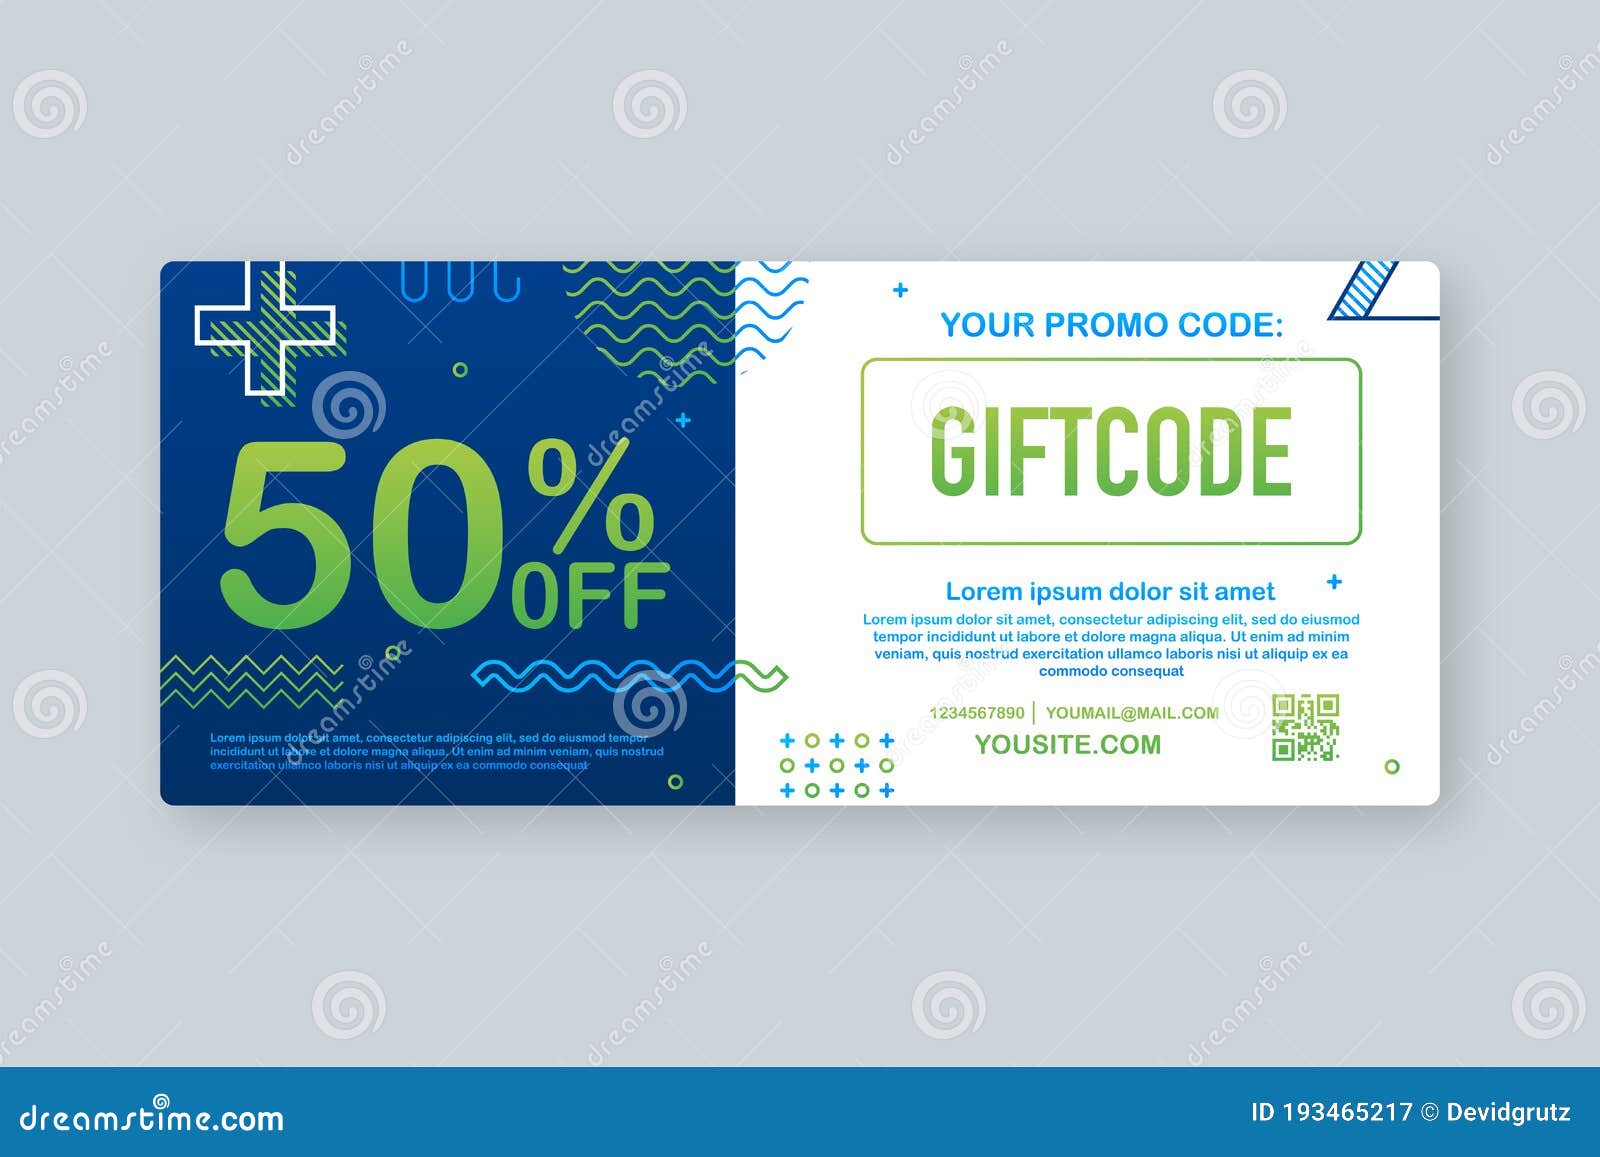 6 Tips To Make Promo Codes Work